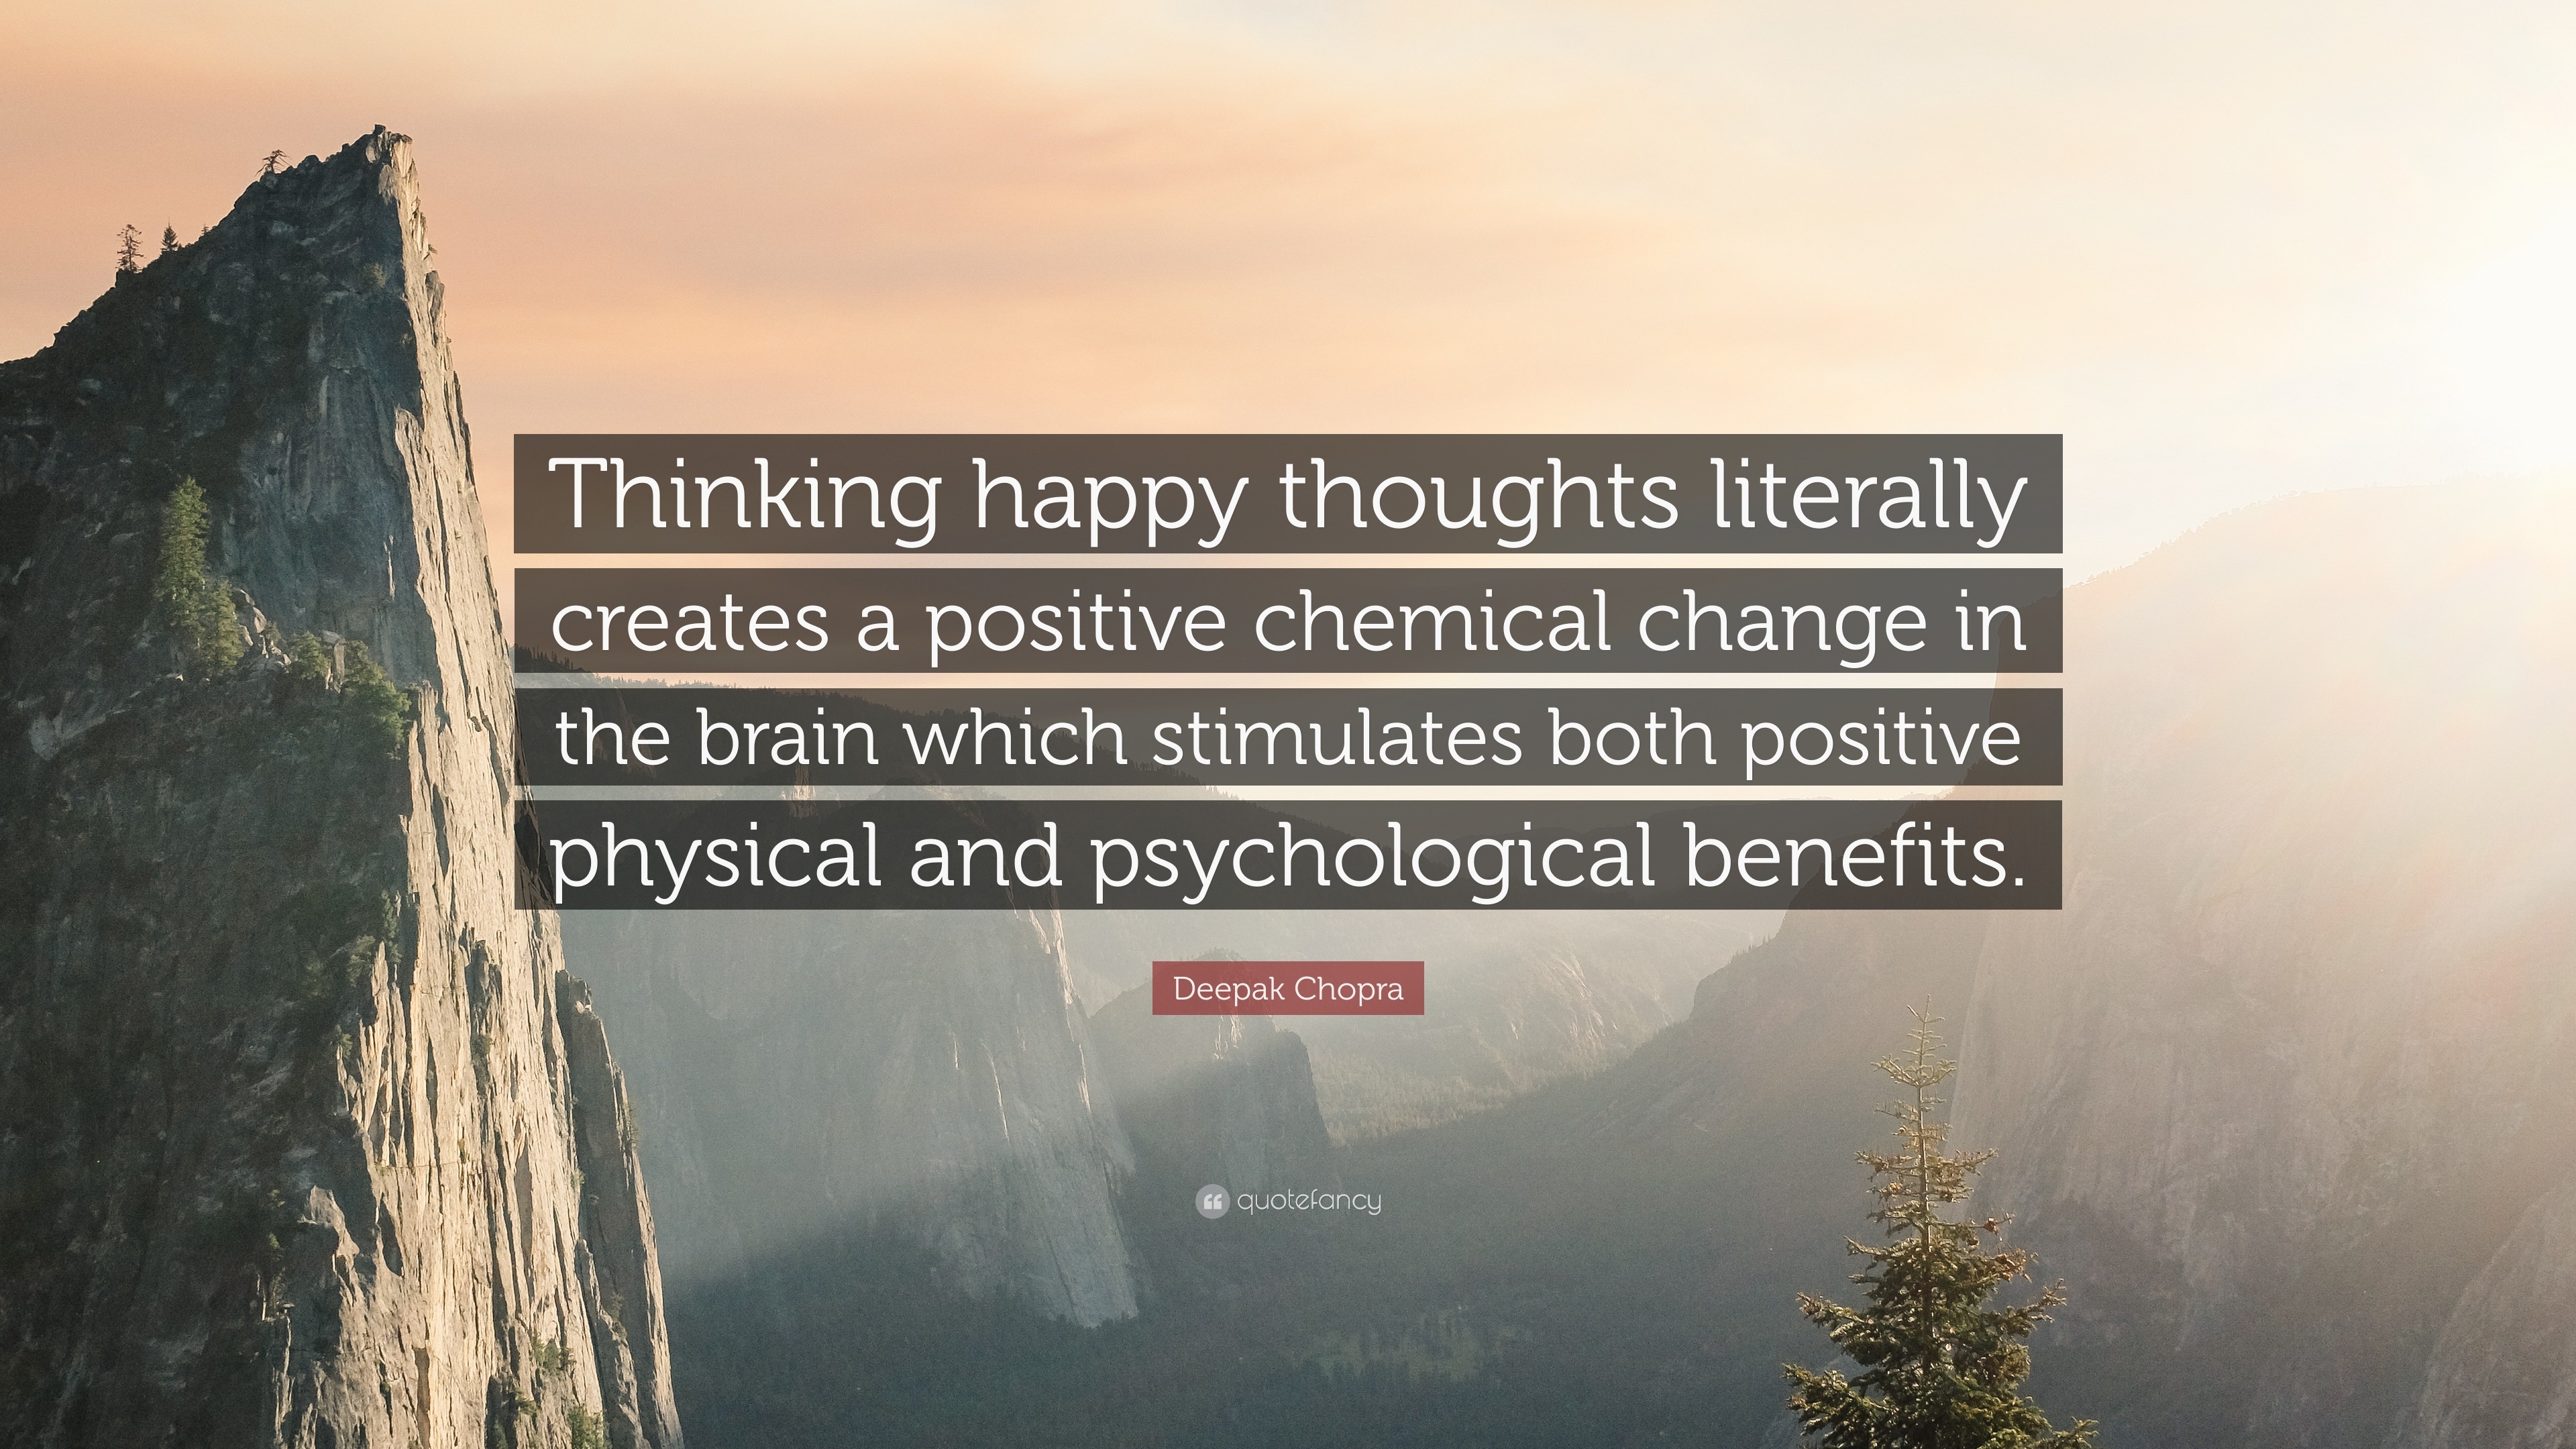 Deepak Chopra Quote: “Thinking happy thoughts literally creates a